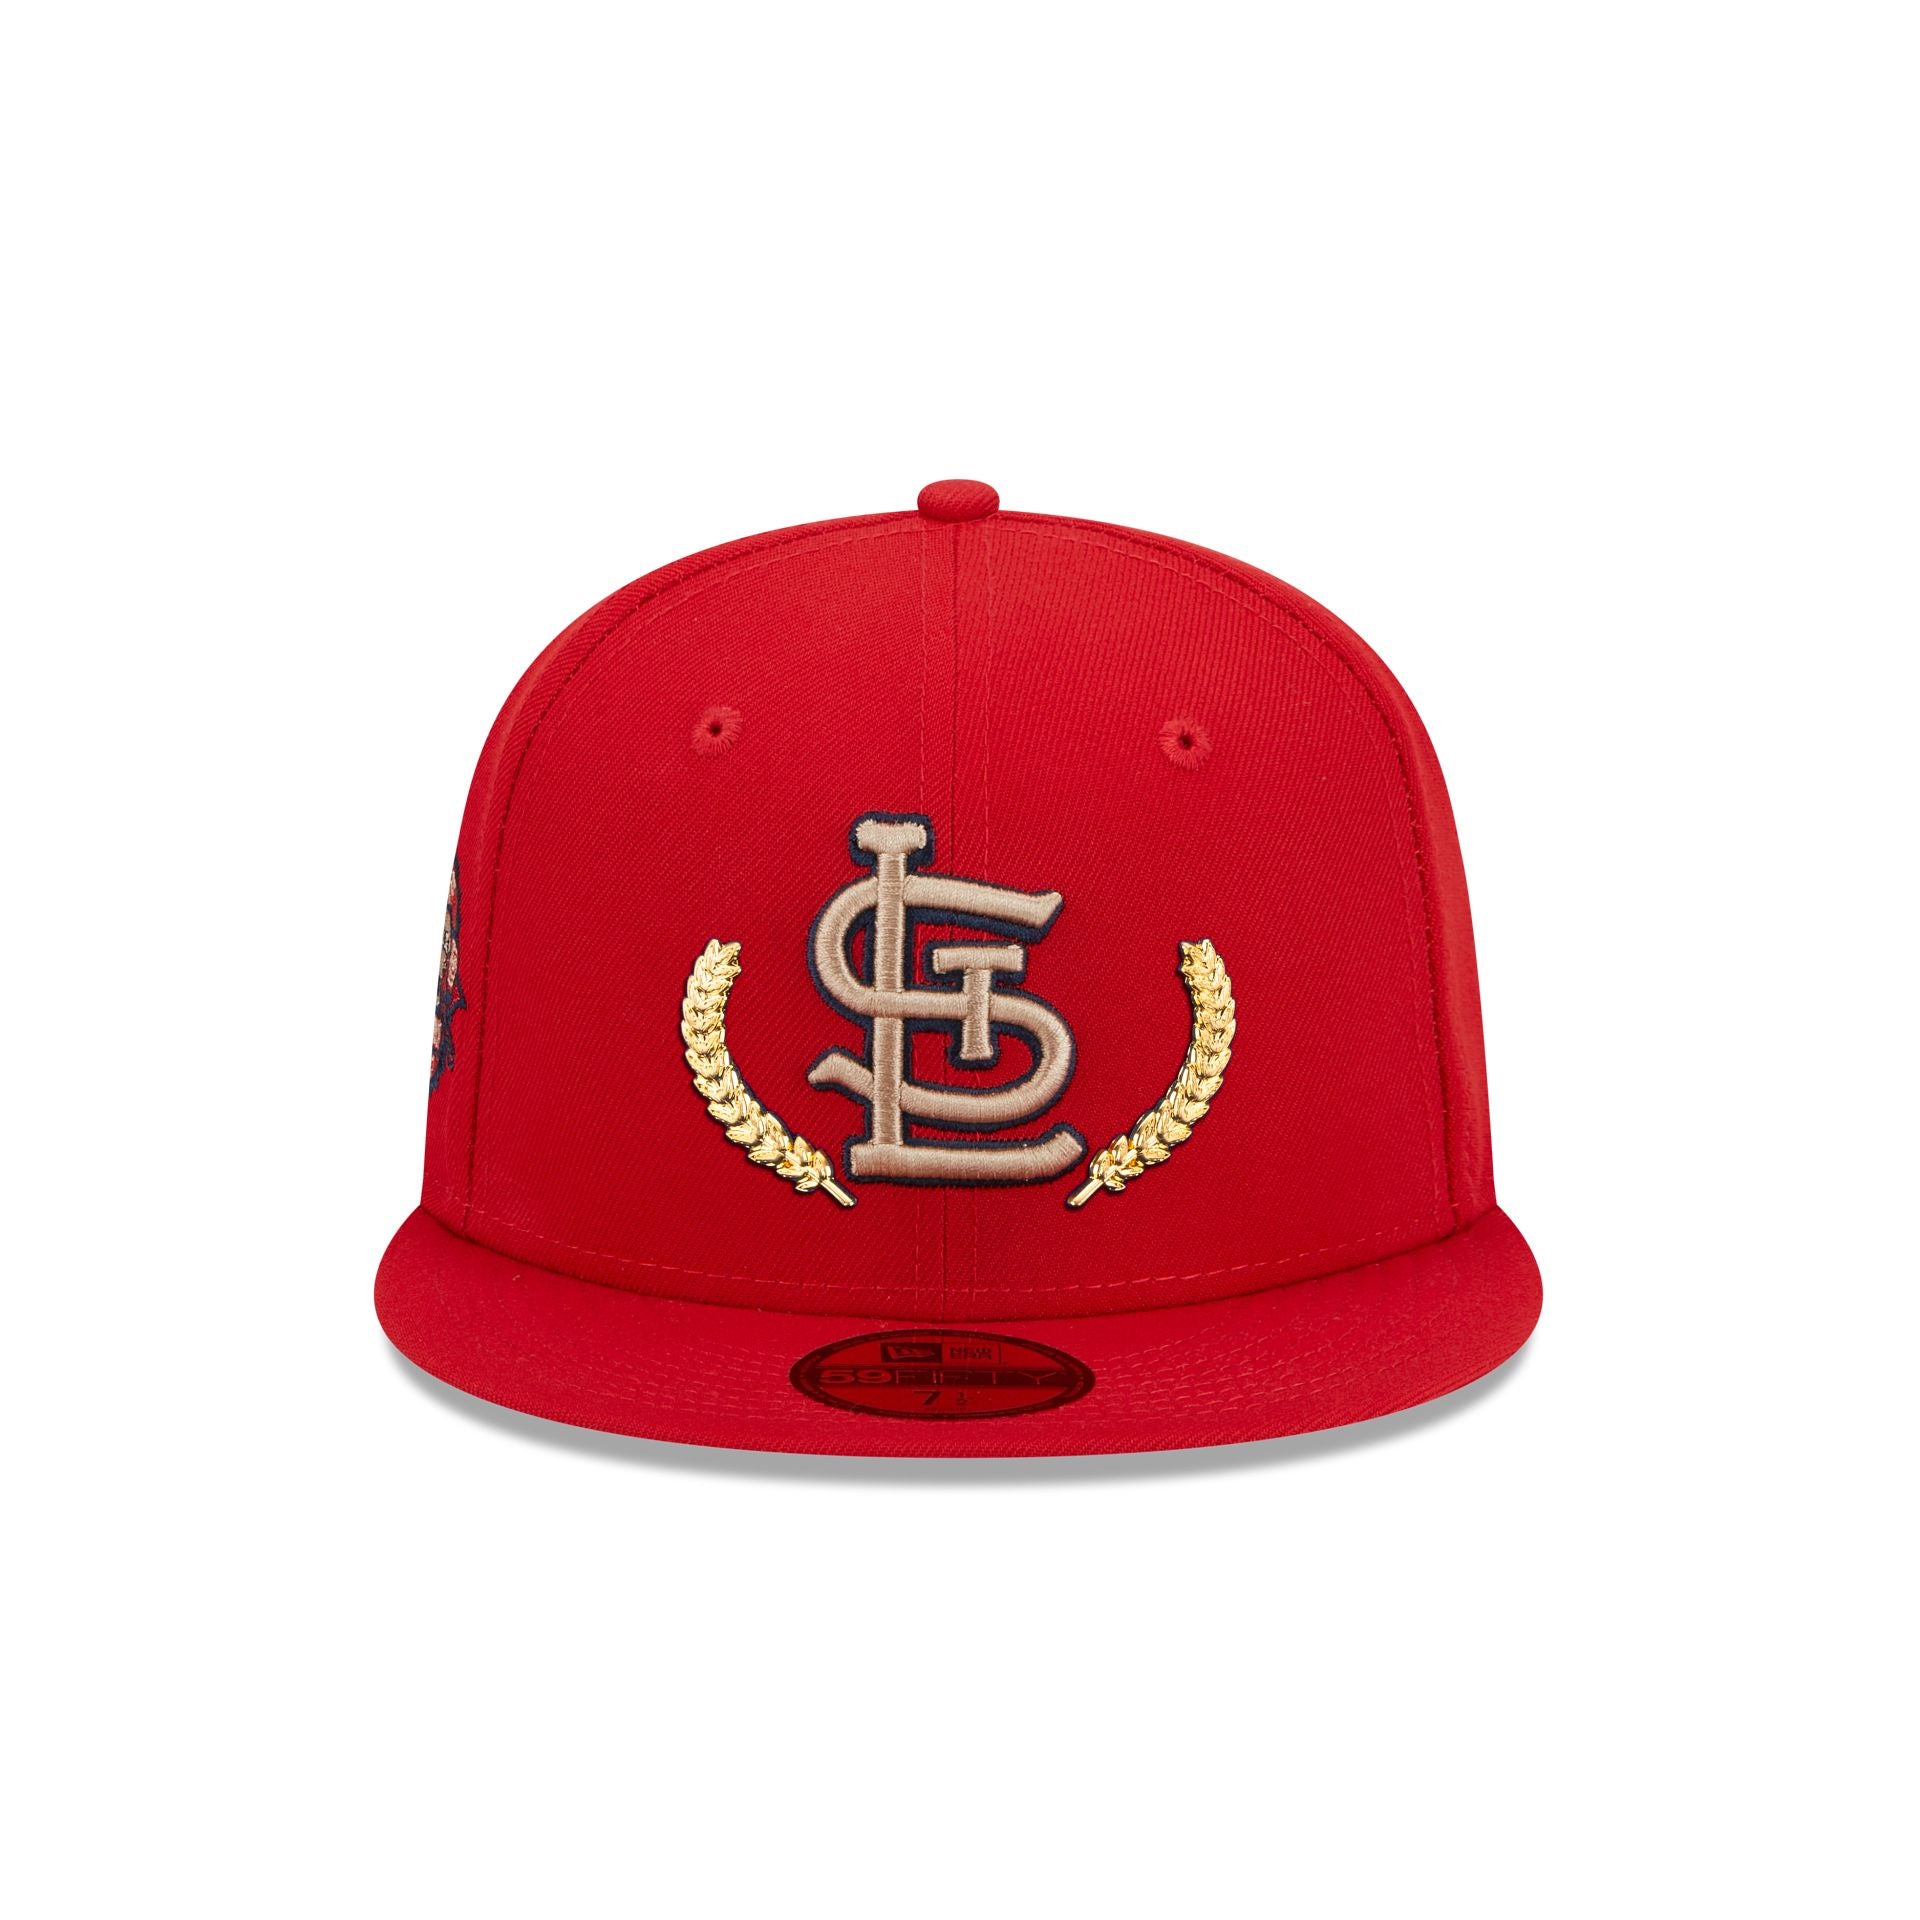 St. Louis Cardinals Gold Leaf 59FIFTY Fitted Hat, Red - Size: 7 1/2, MLB by New Era